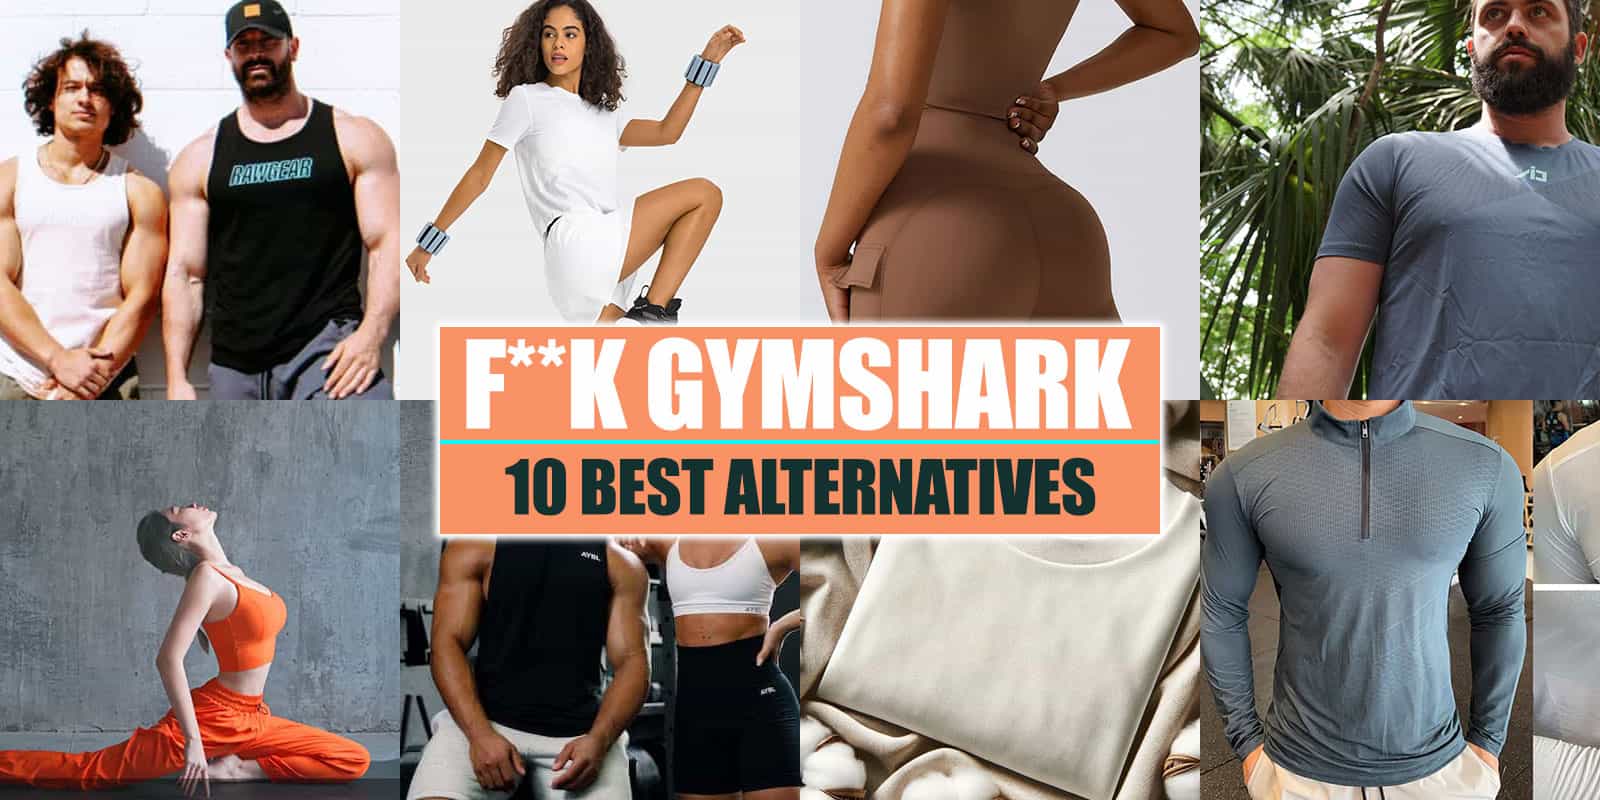 Getting The Best Out Of Gymshark: 5 Performance Must Haves For Men